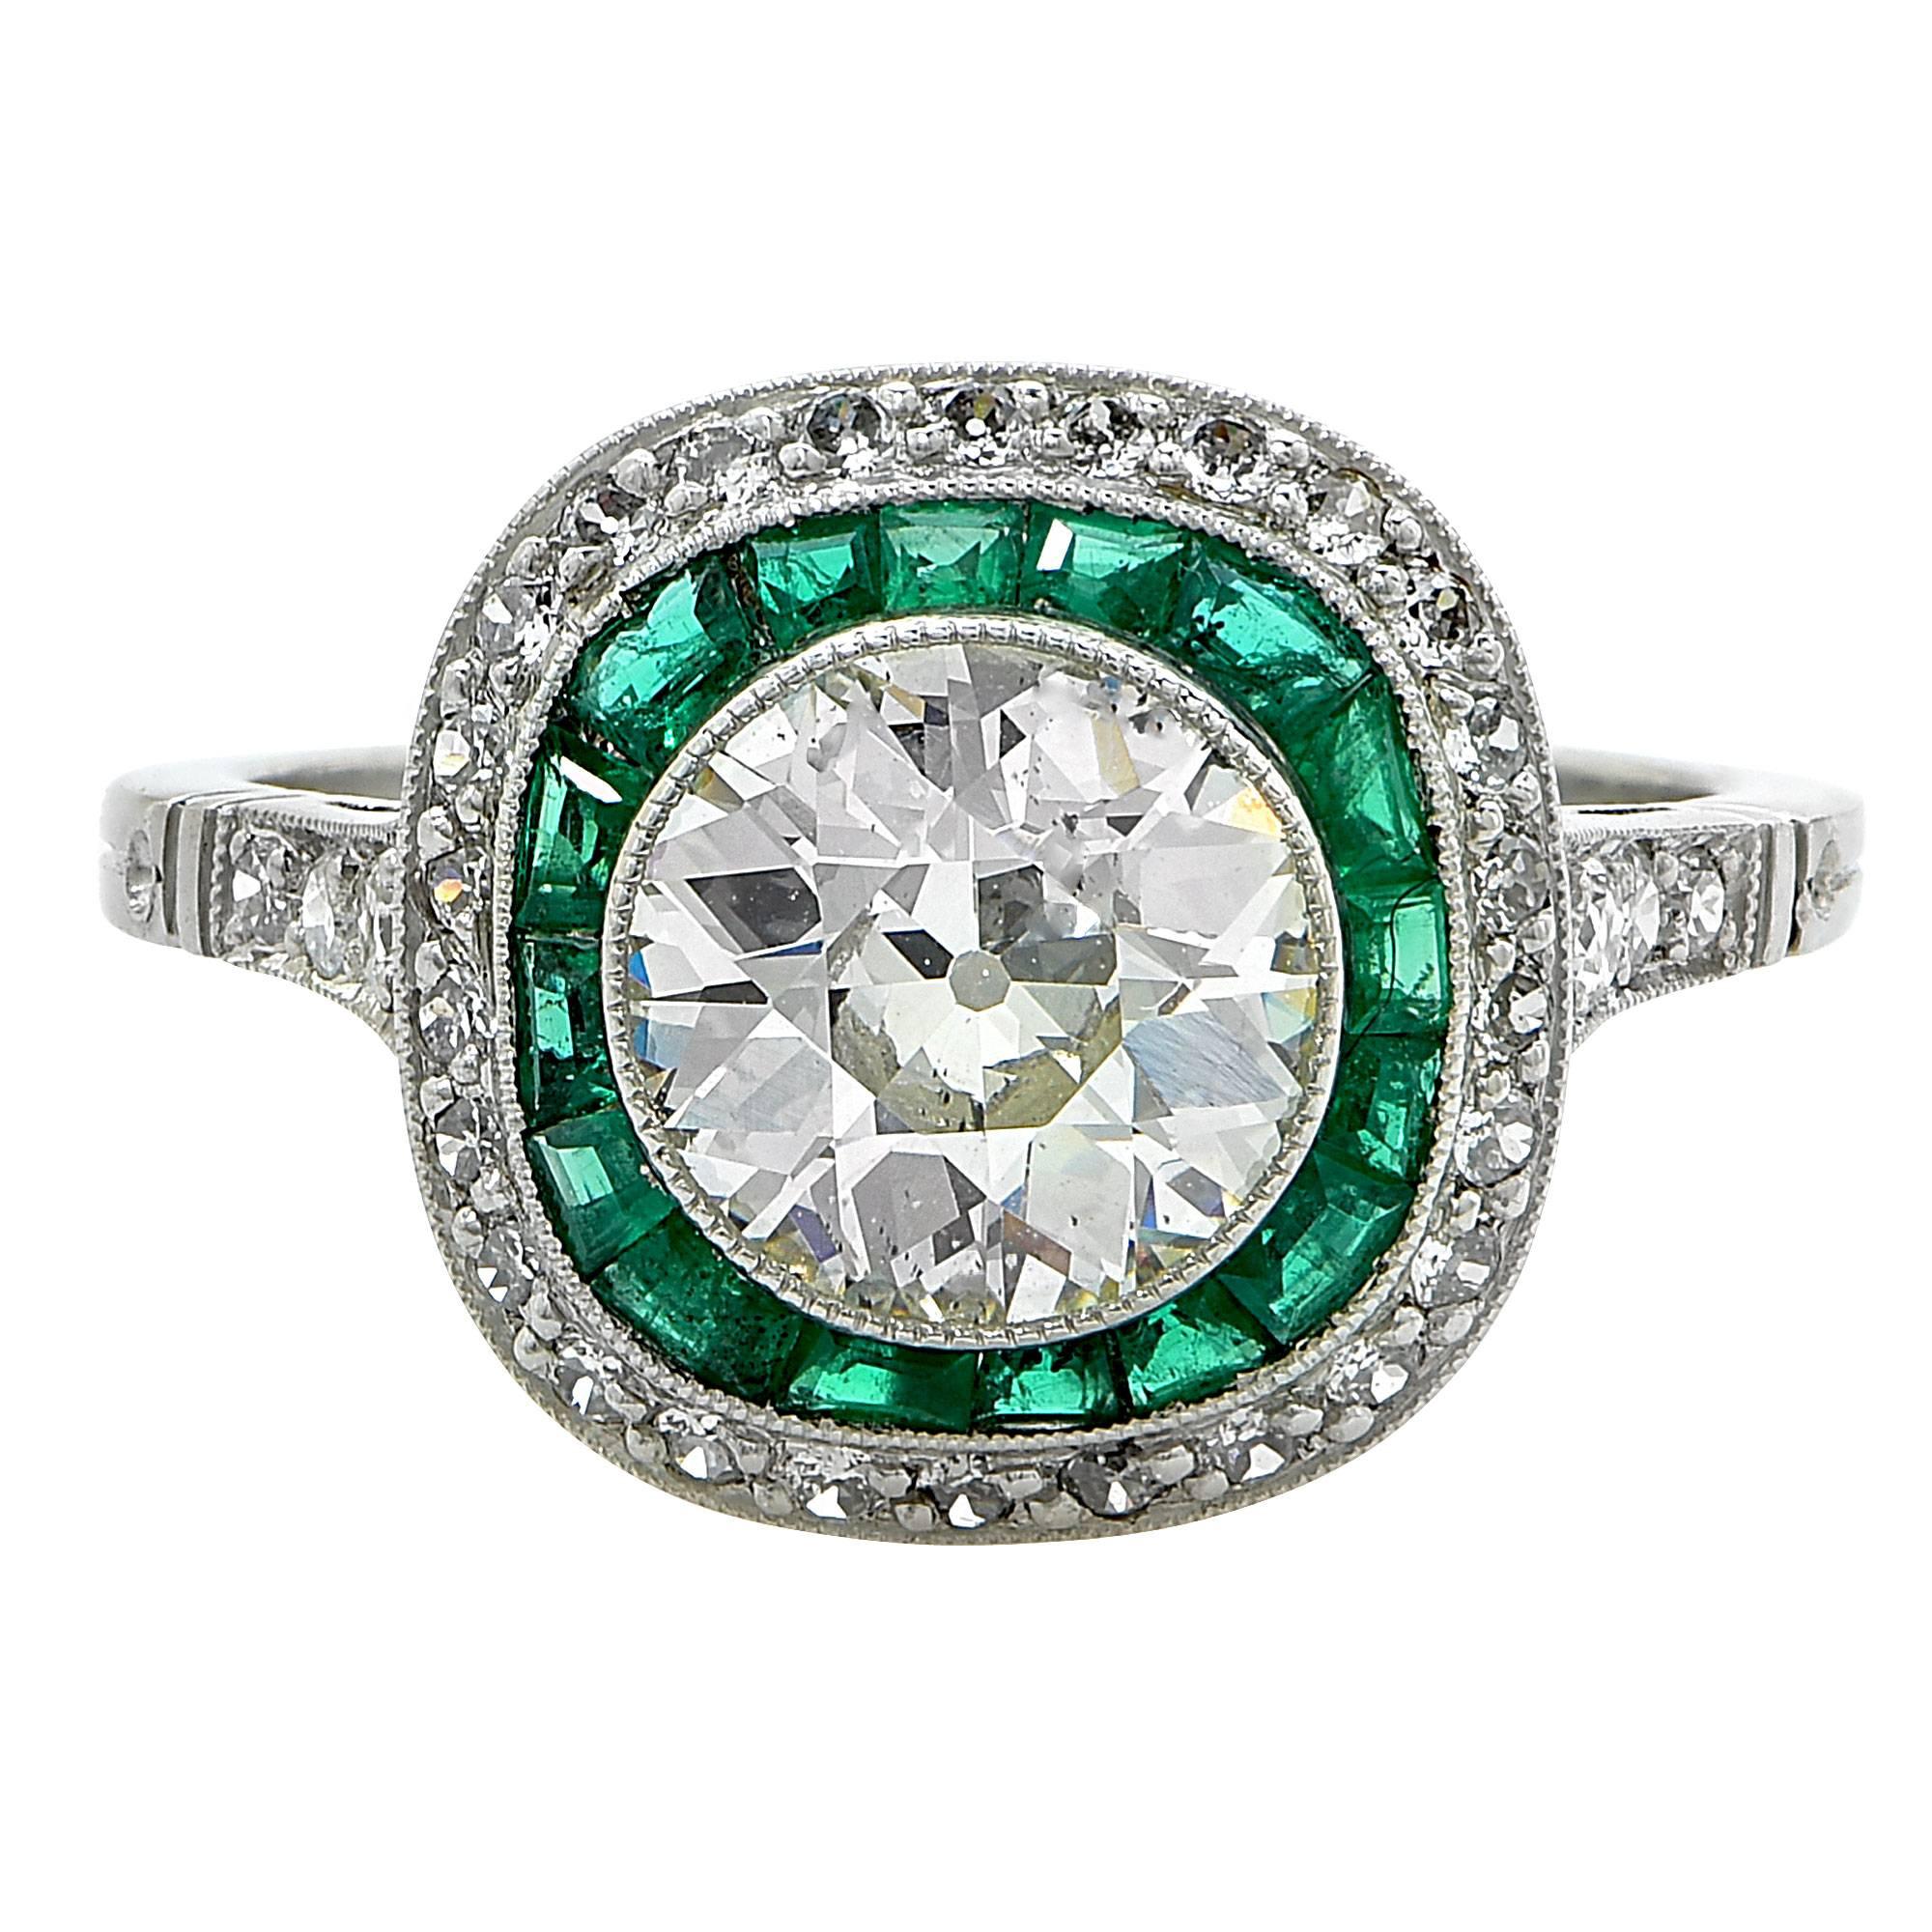 Platinum Art Deco Ring containing a 1.80ct European cut diamond, H color, SI2 clarity, surrounded by 16 vibrant green emeralds custom cut to accent the center diamond. The ring is further accented by the hand cut filigree on the gallery.

Ring